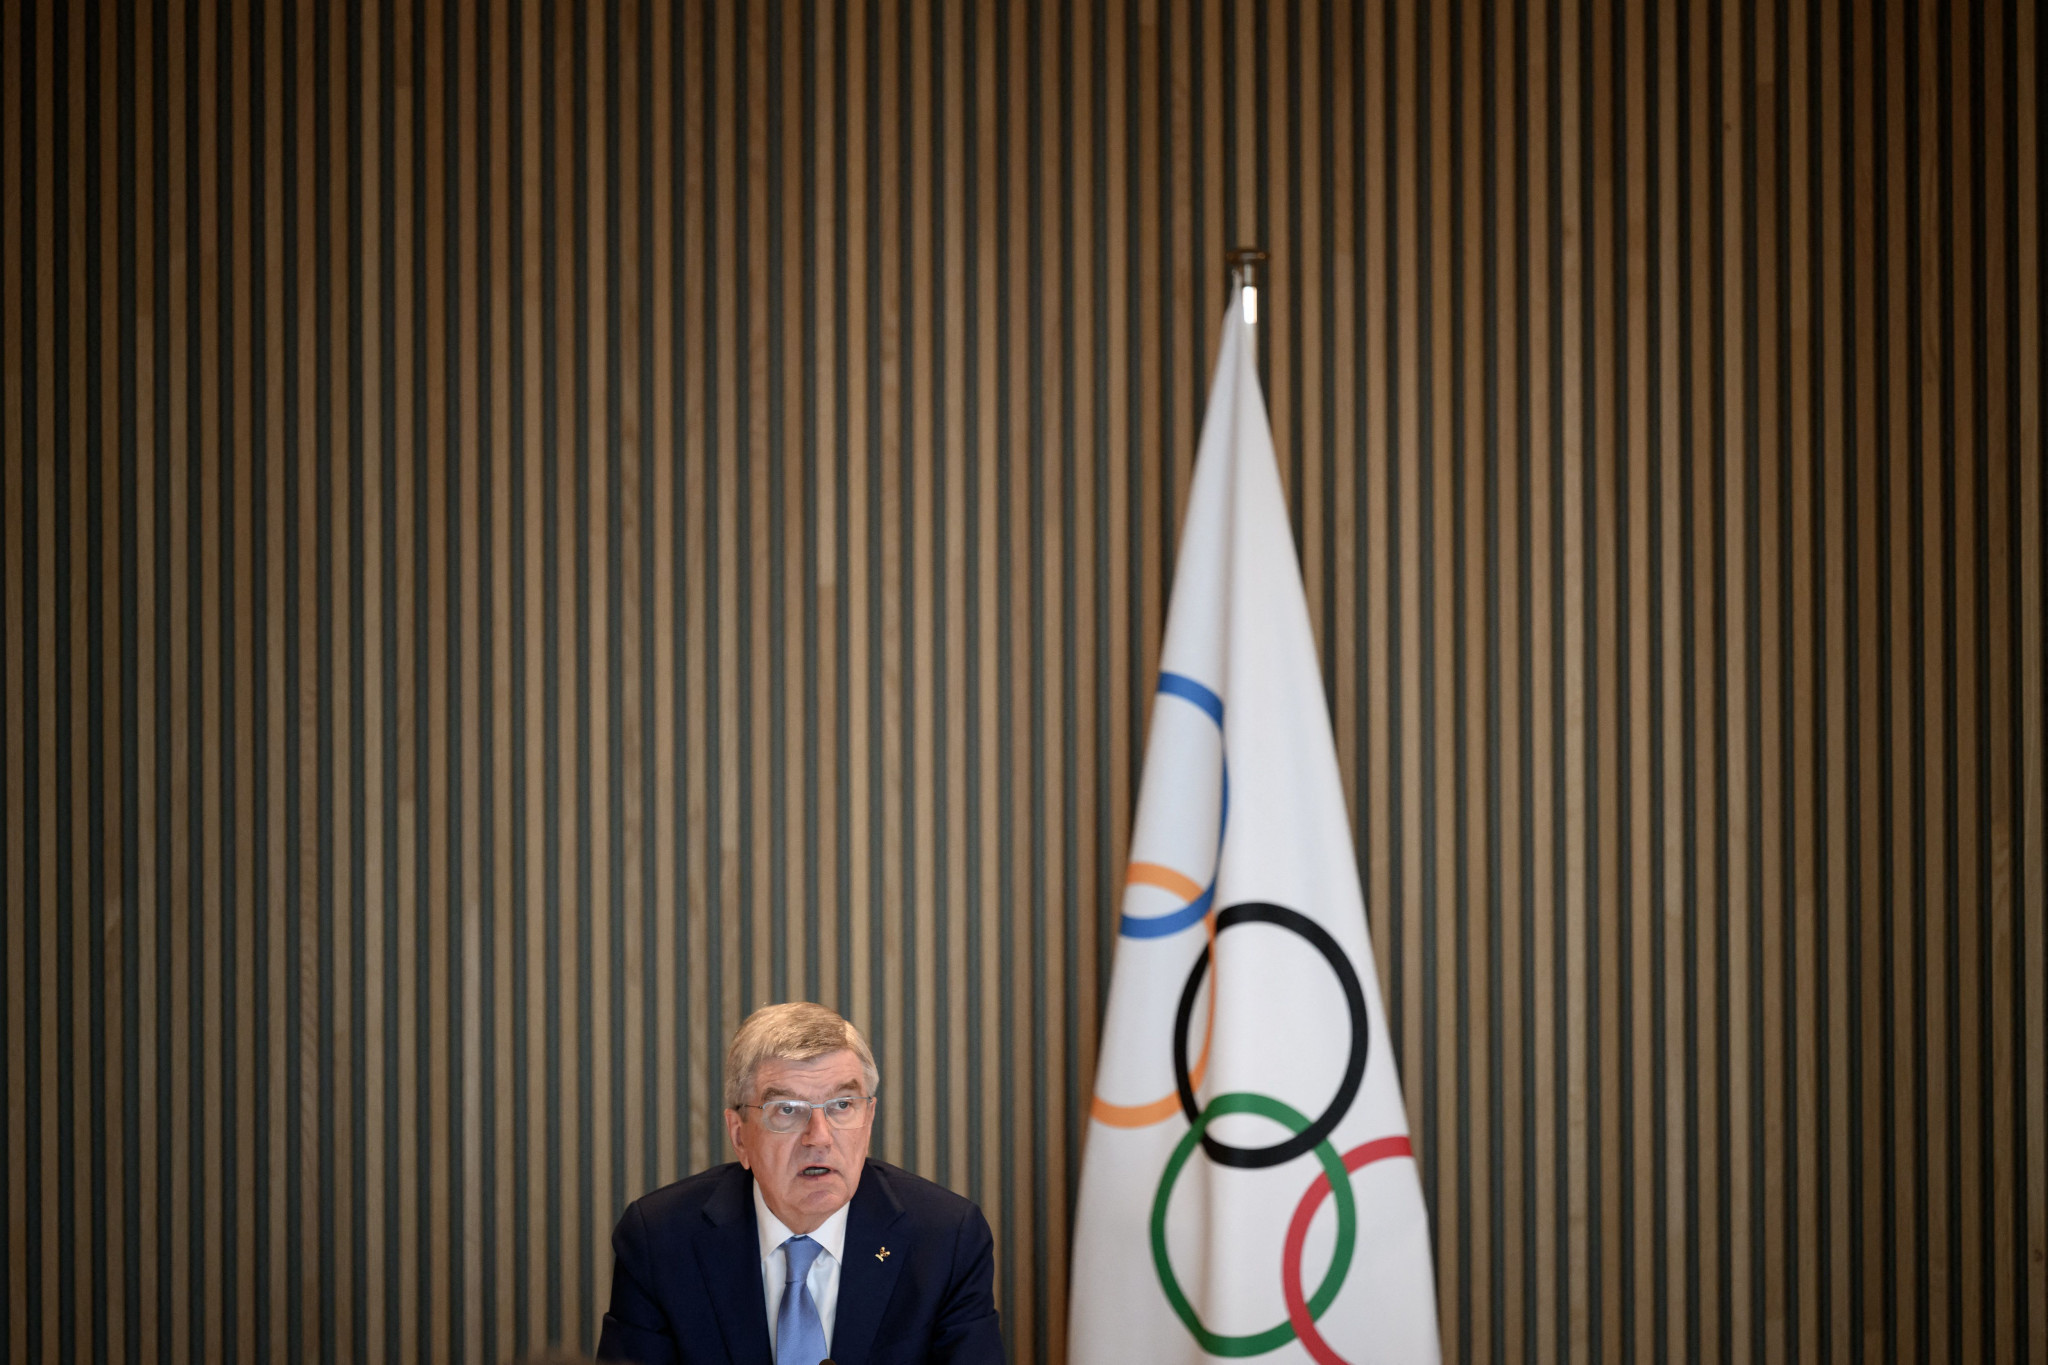 IOC President Thomas Bach said Government opposition to the participation of Russian and Belarusian athletes was "deplorable" ©Getty Images